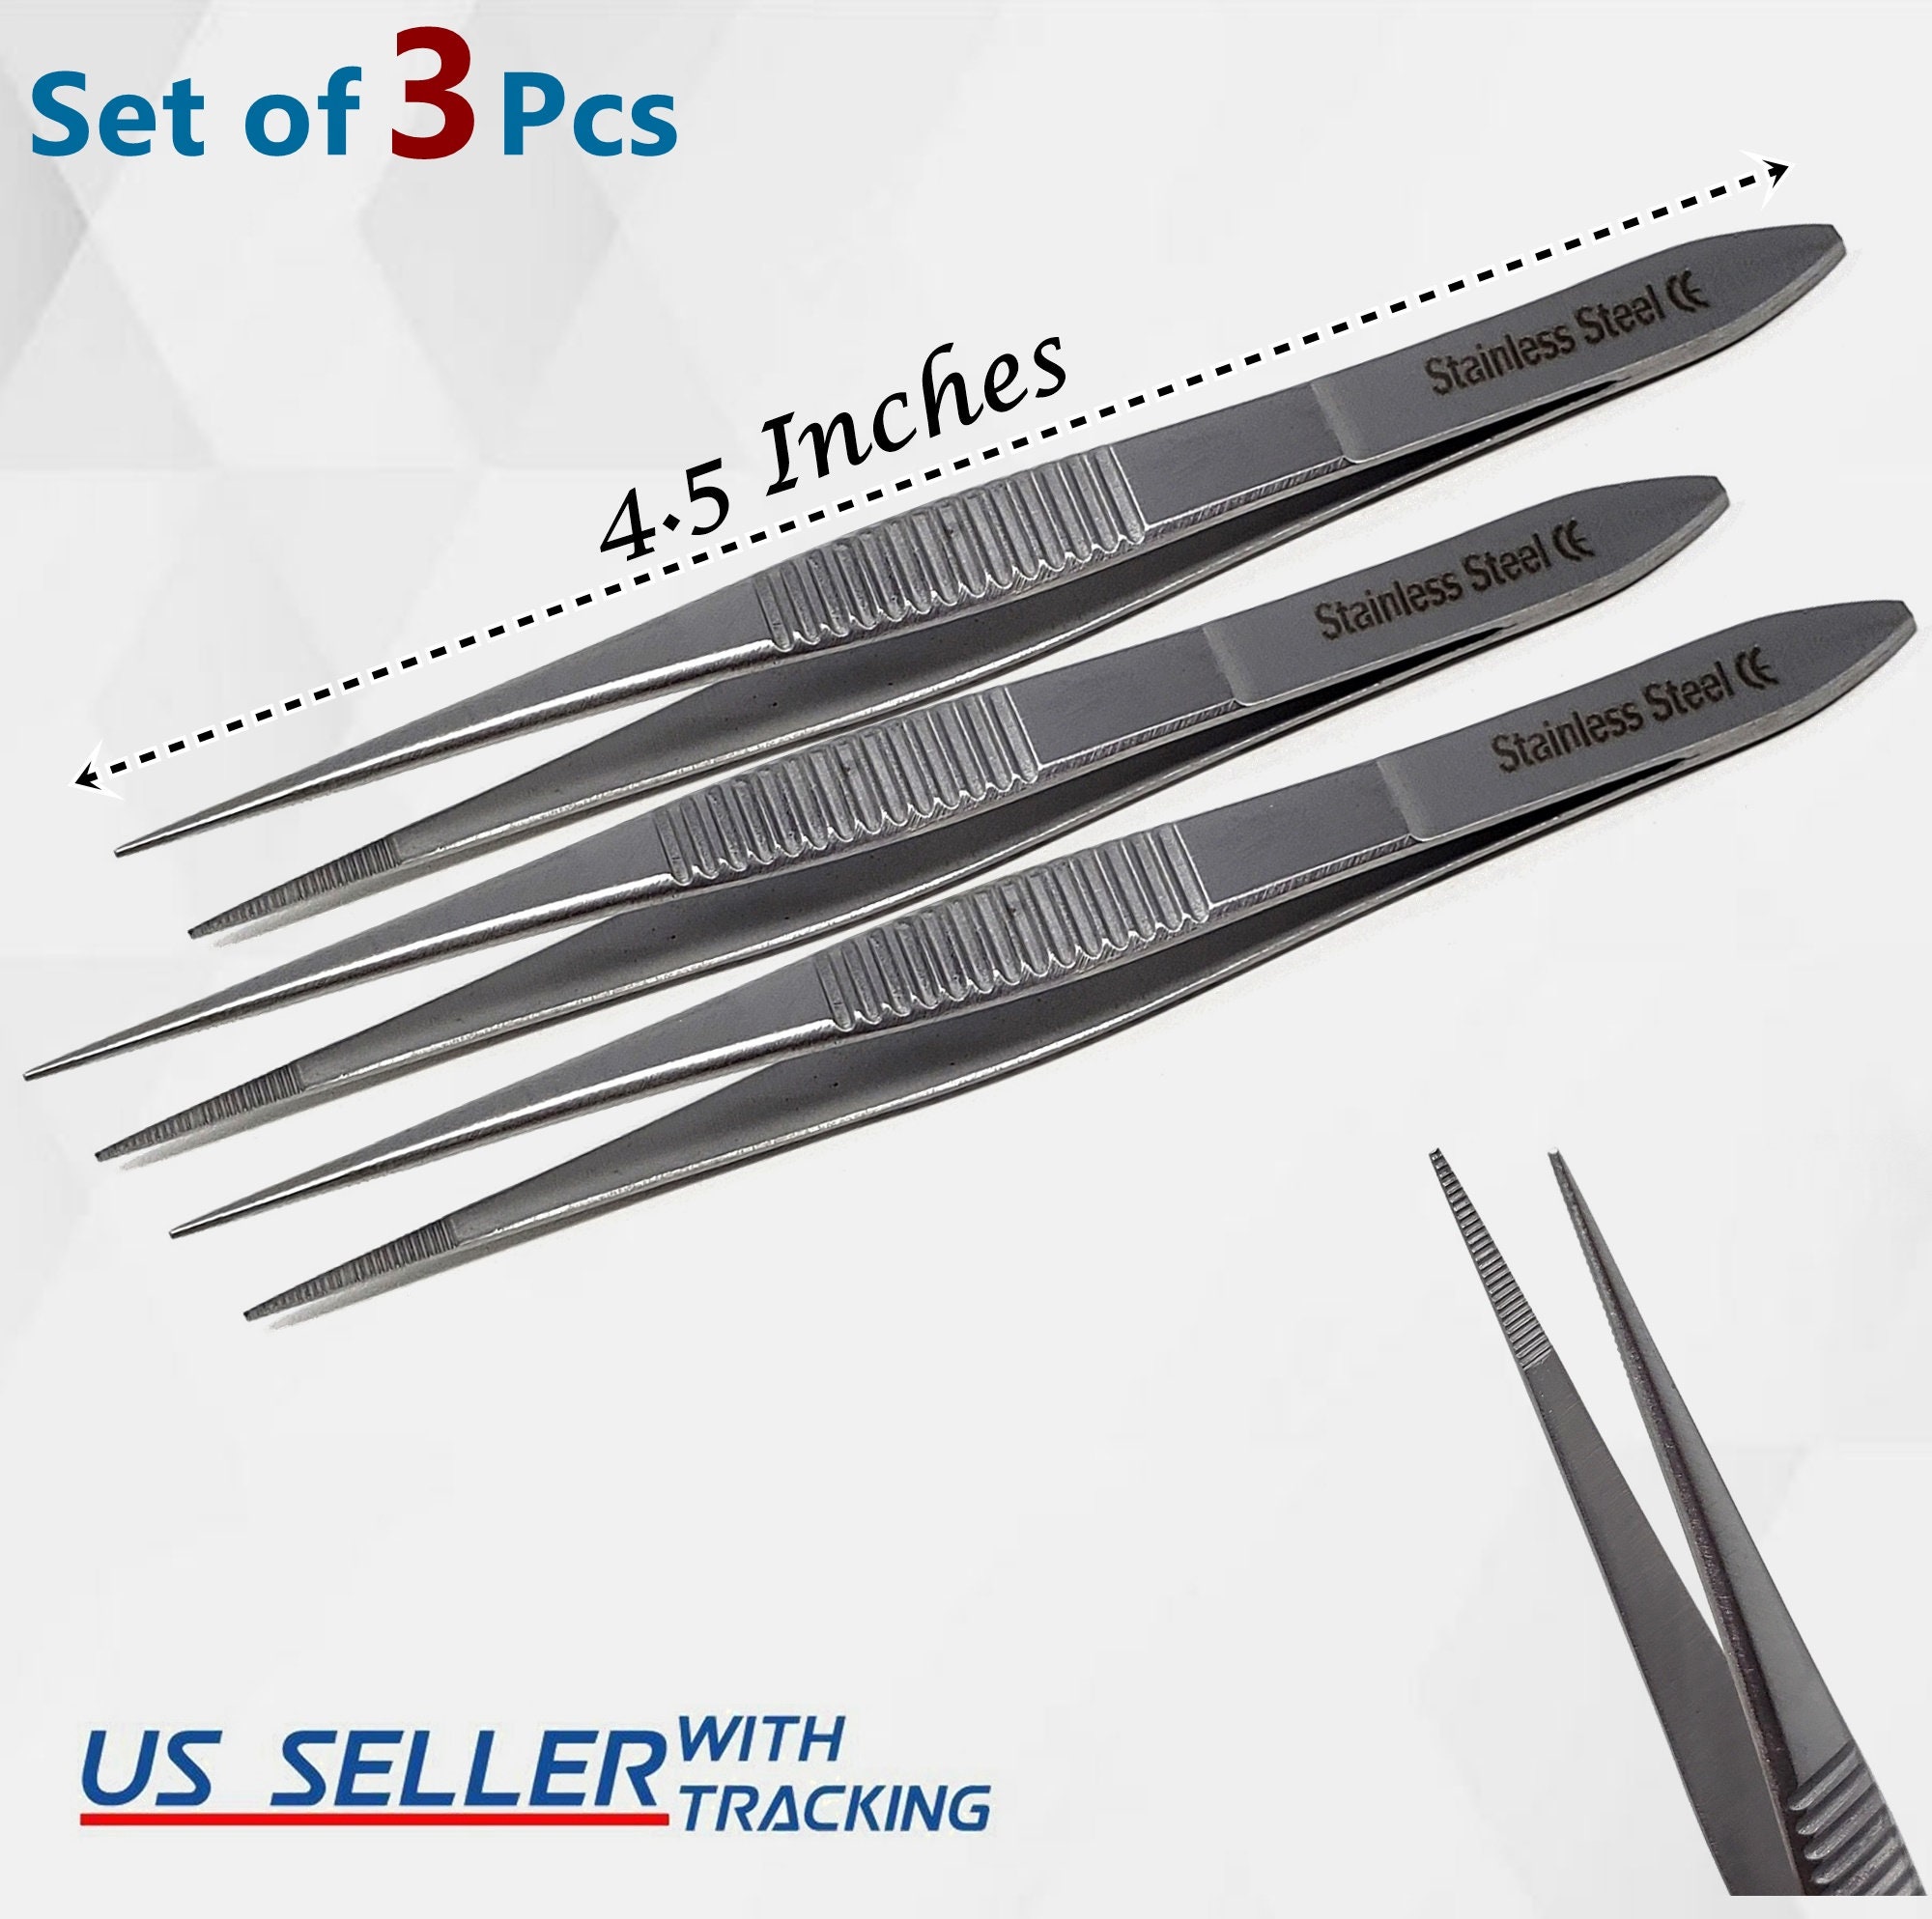 Curved Sewing Tweezers Light Weight Stainless Steel Sewing